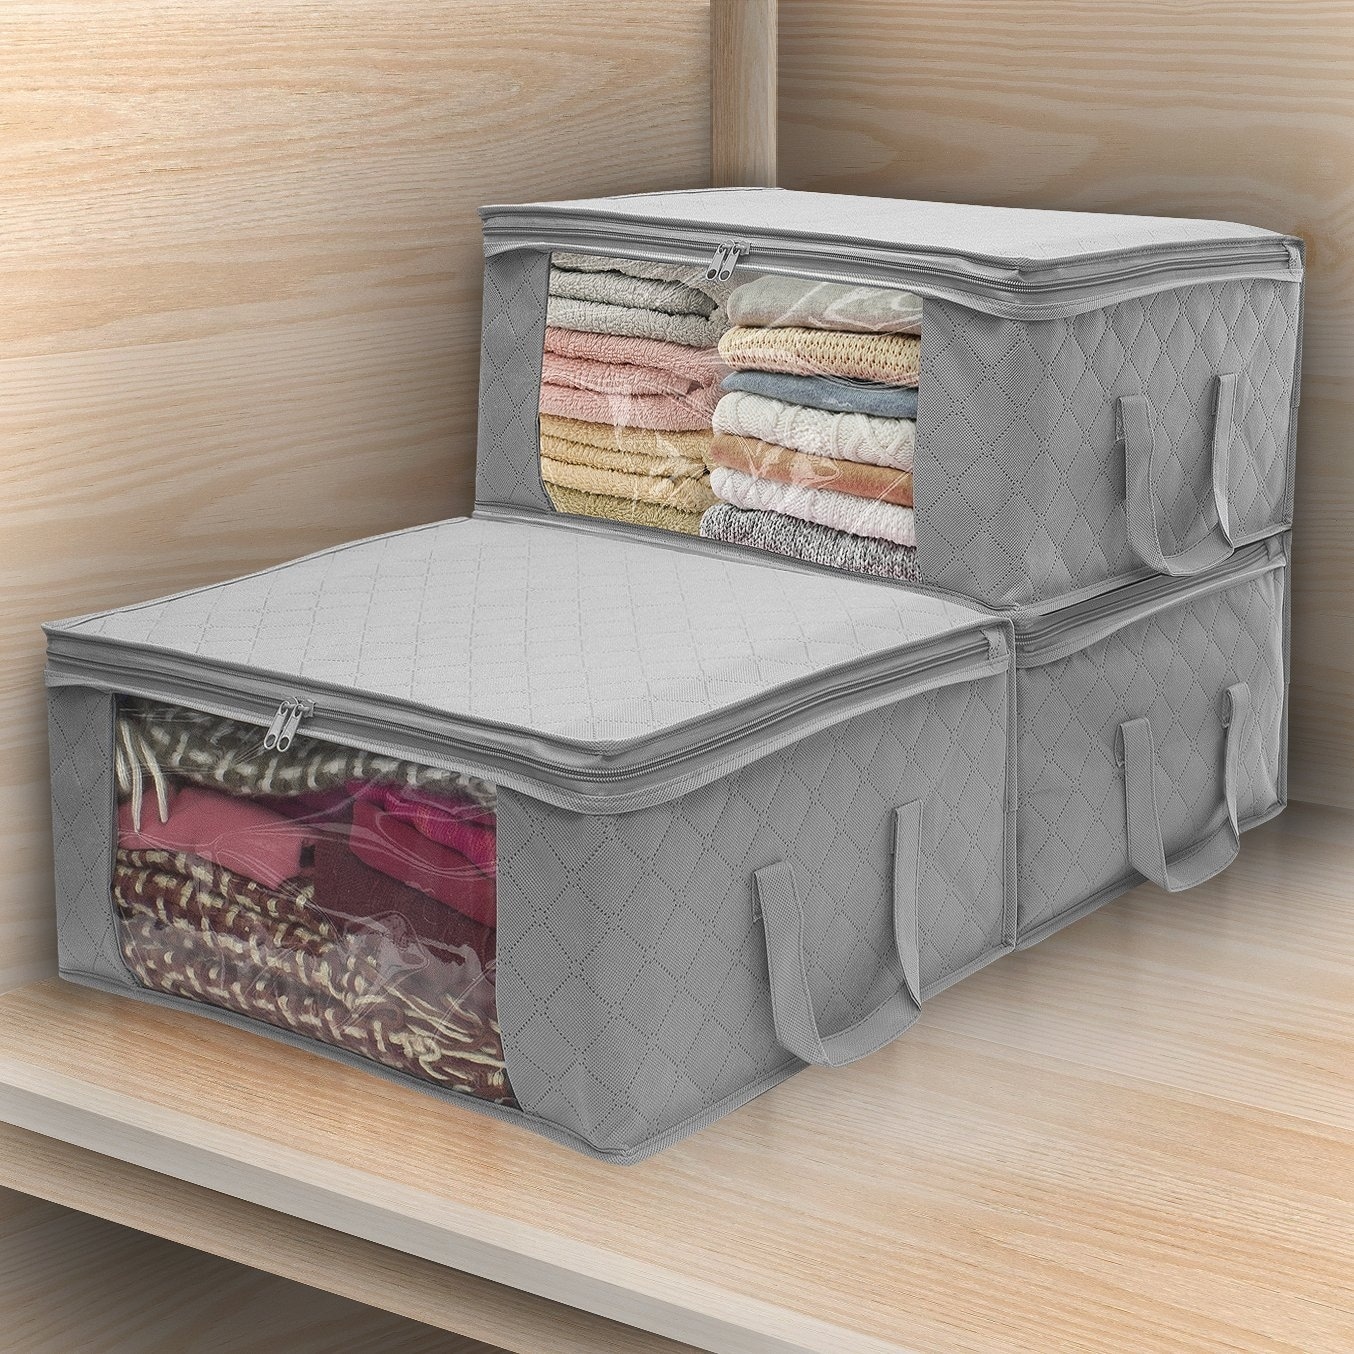 https://ak1.ostkcdn.com/images/products/is/images/direct/d075f72b9feb1b8193491a760cfe53878cd206ff/Sorbus%C2%AE-Foldable-Storage-Bag-Organizer-Set%2C-Great-for-Clothes%2C-Blankets%2C-Closets%2C-Bedrooms%2C-and-more-%283-Pack%2C-Gray%29.jpg